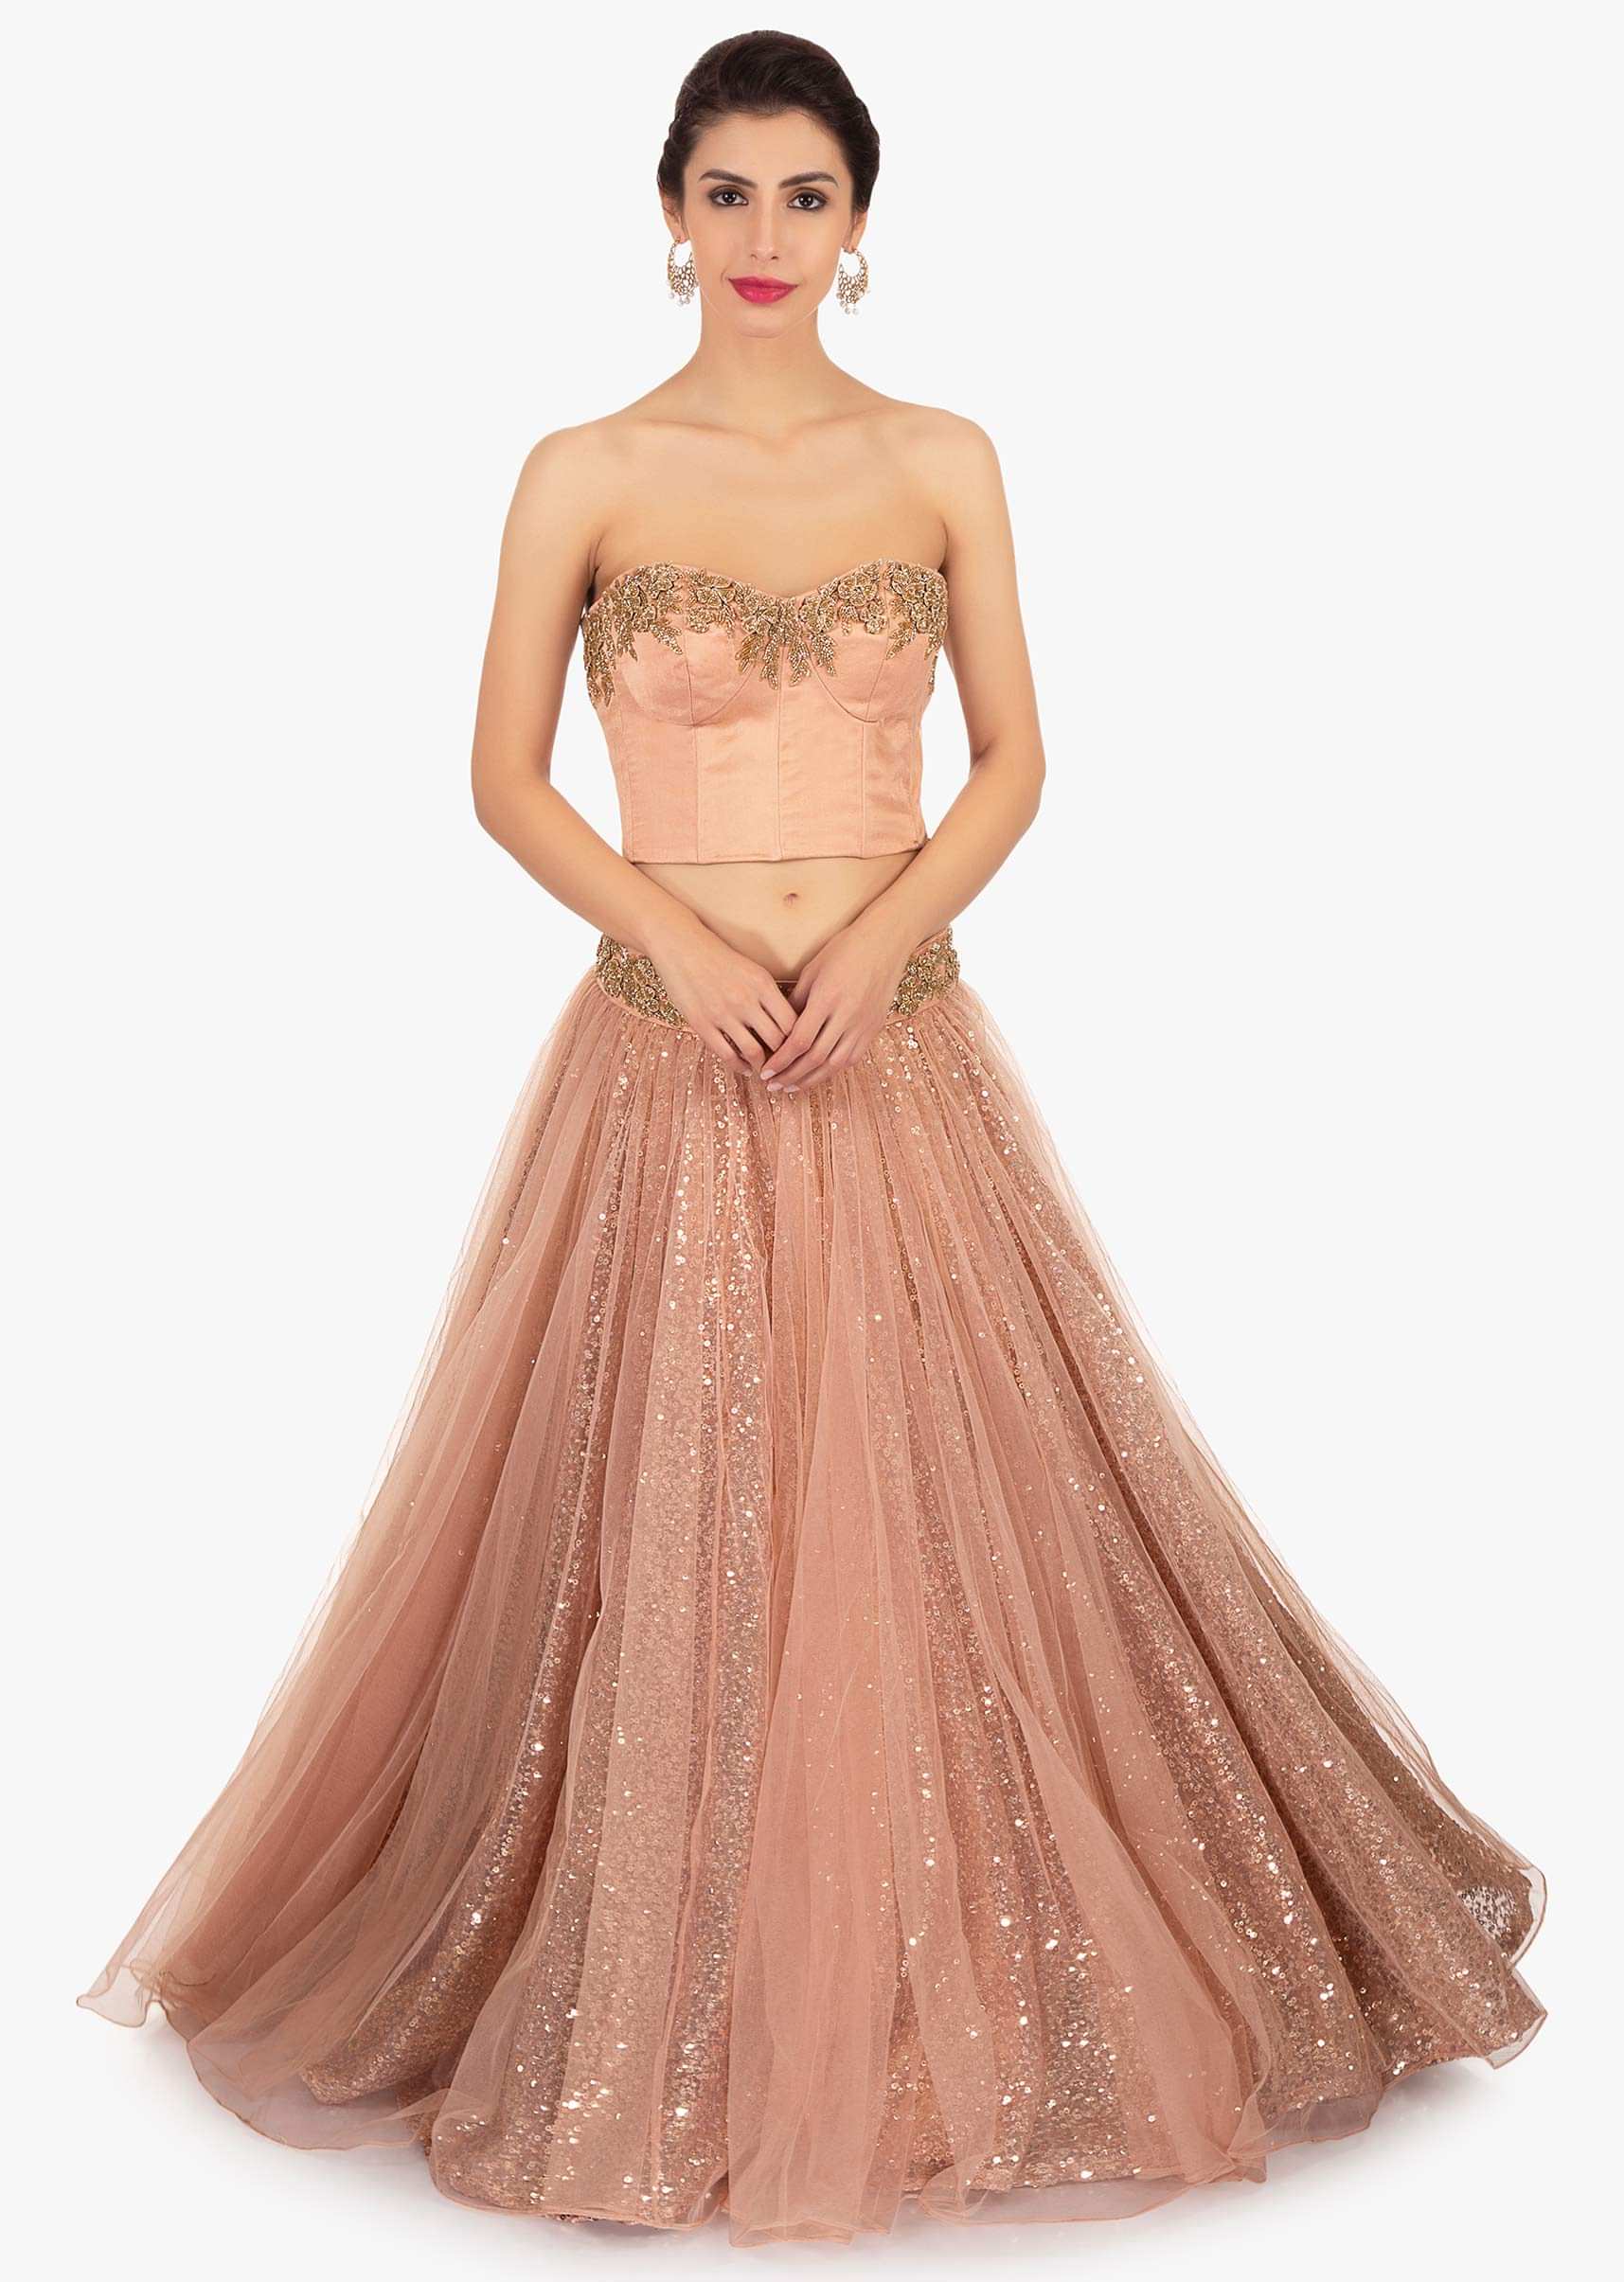 Dark peach strapless crop top paired with sequins fabric skirt